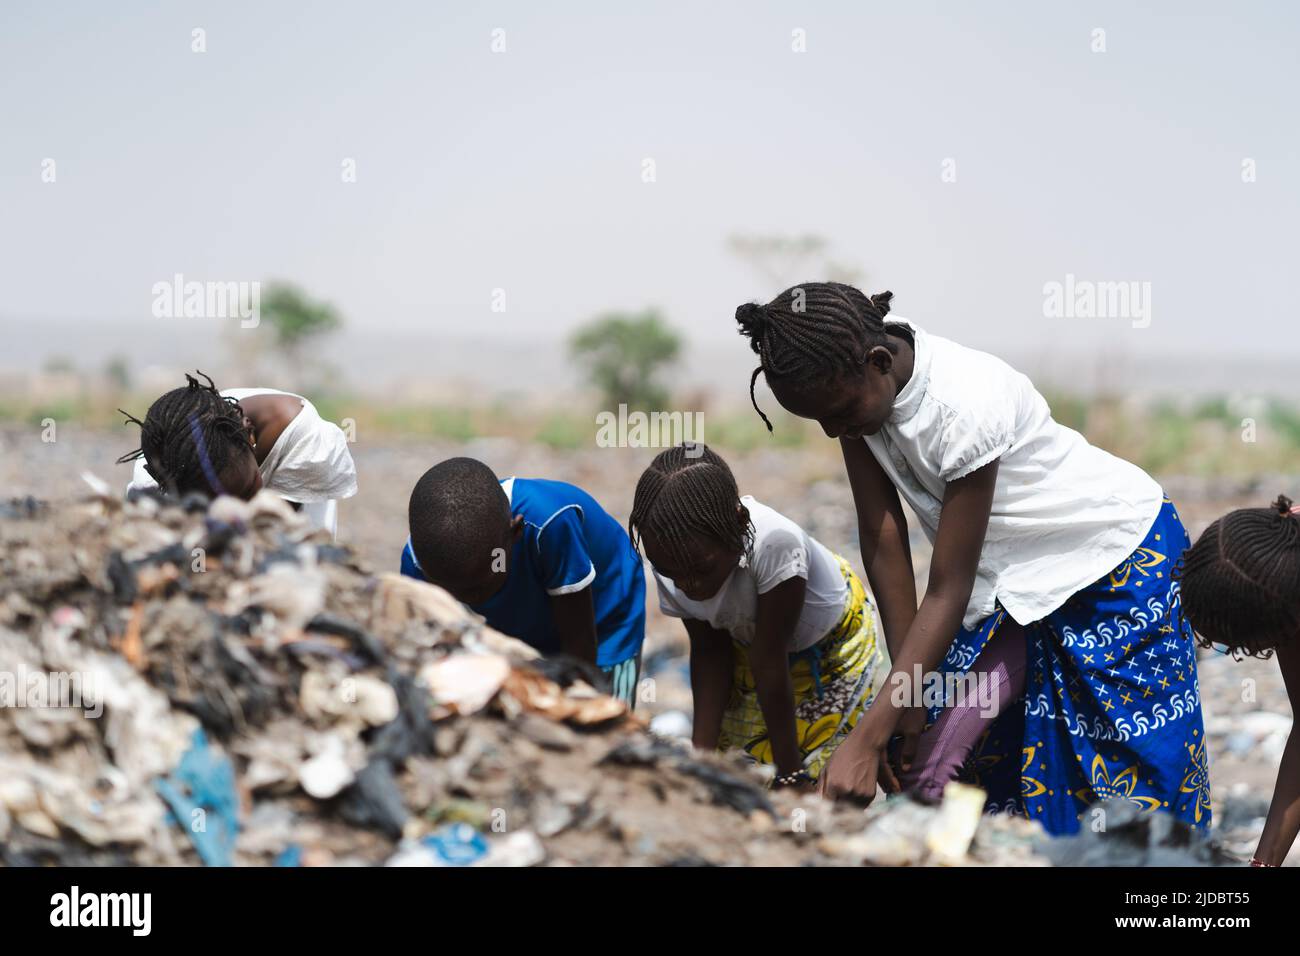 Four West African homeless children digging in a landfill looking after recyclable items to sell; poverty concept Stock Photo